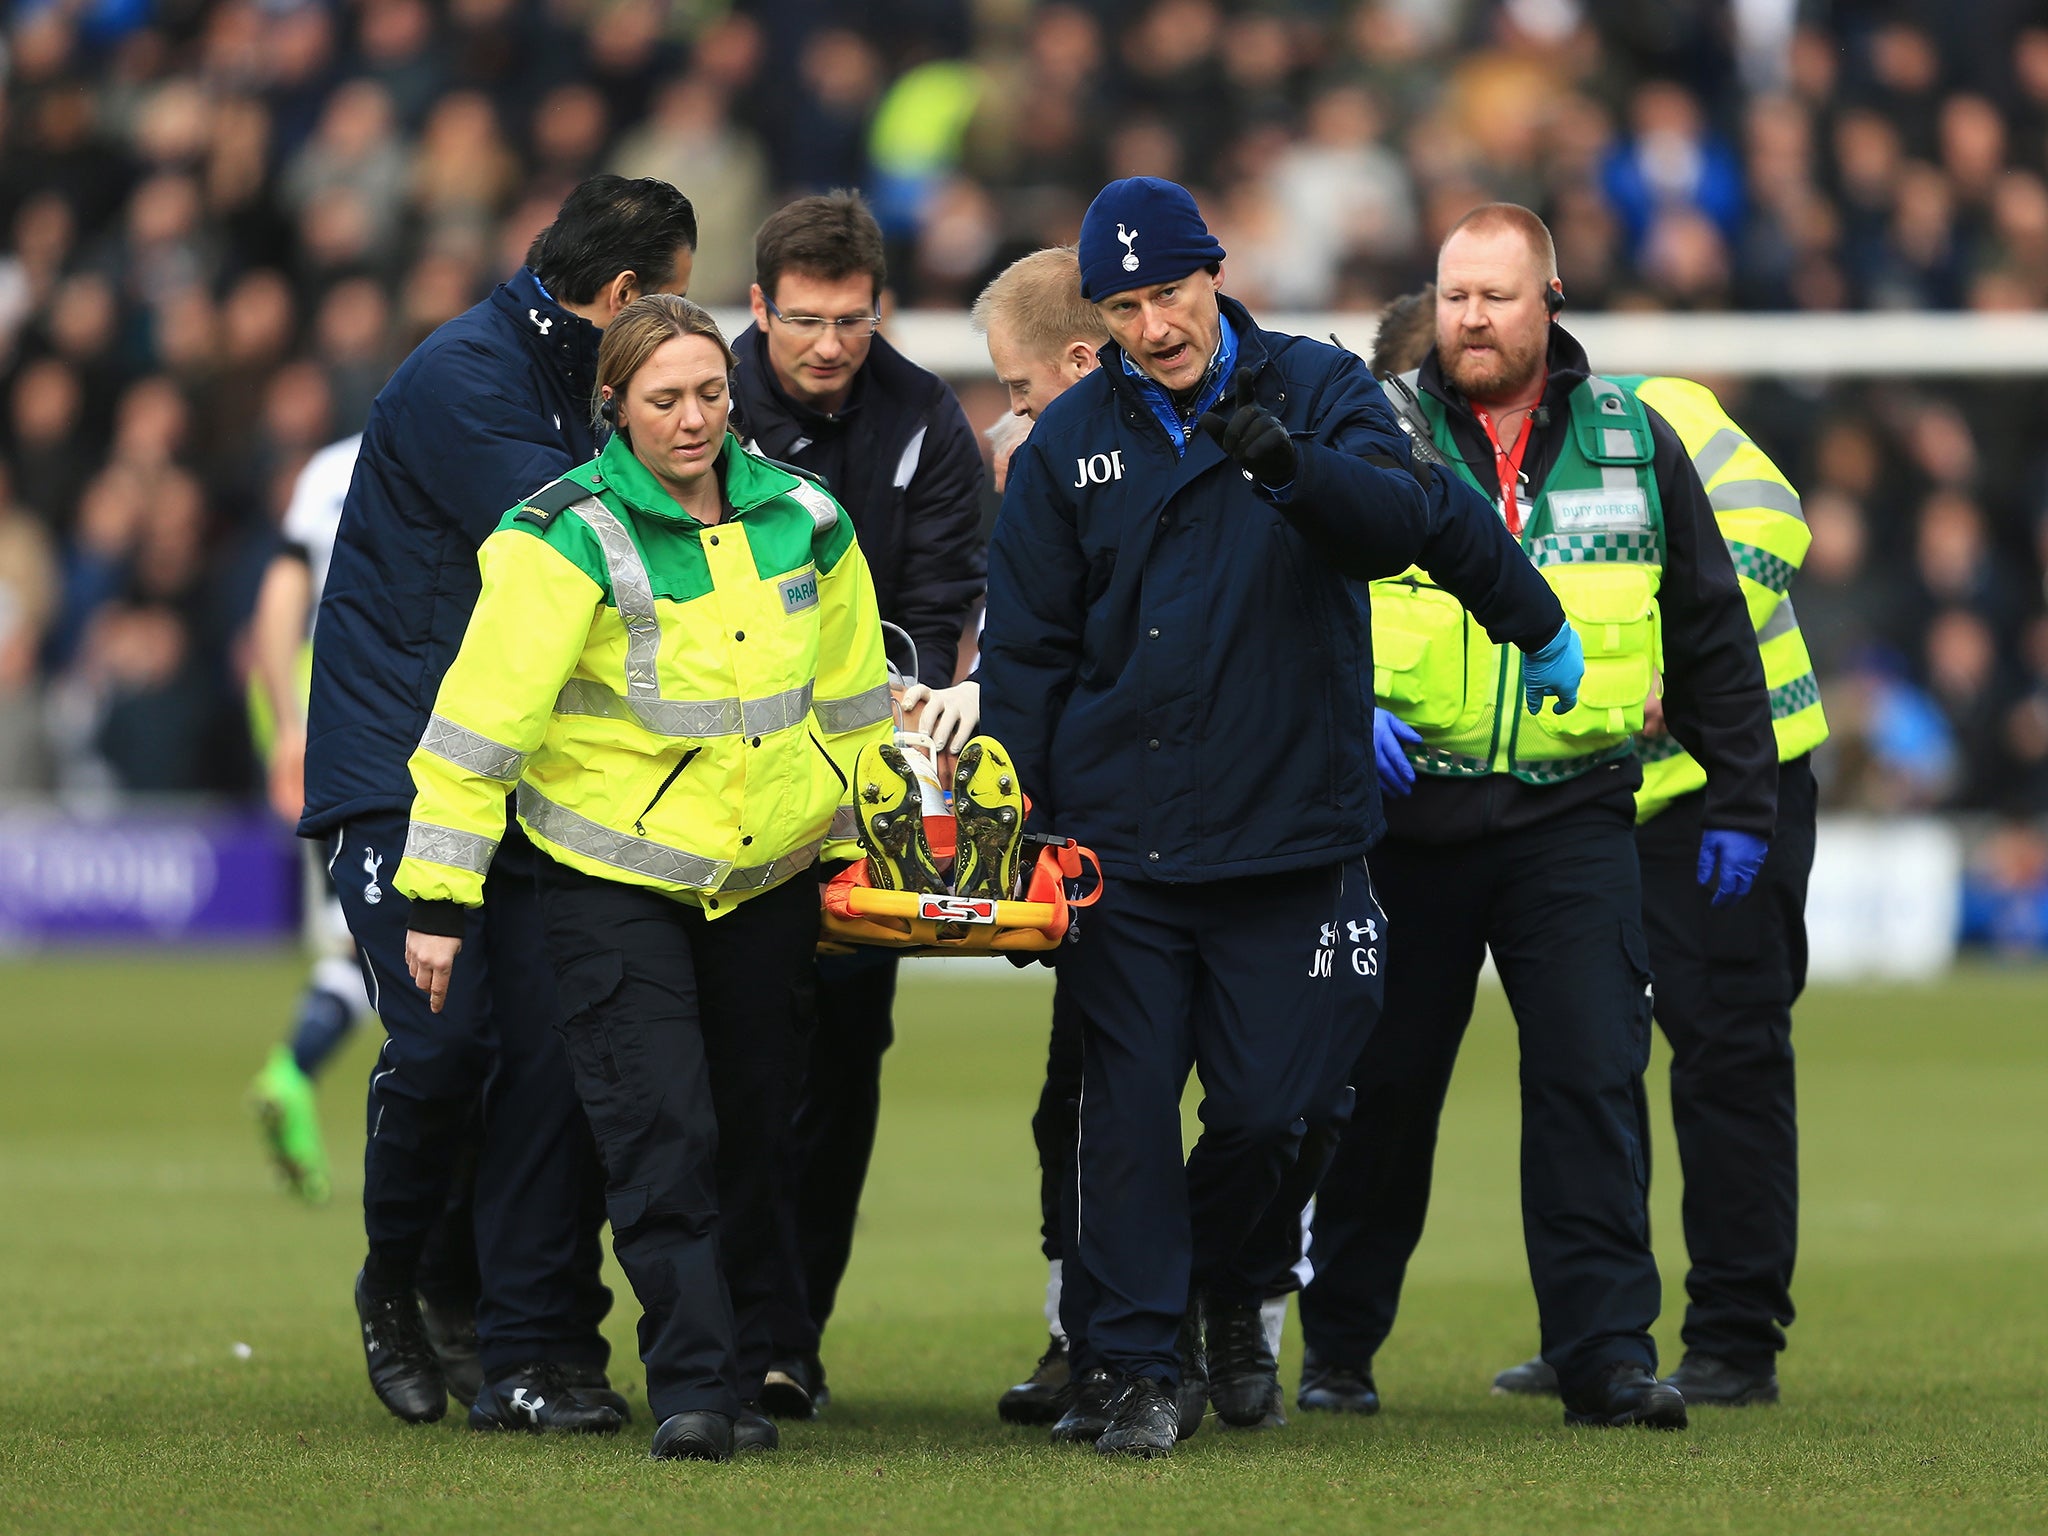 Colchester United's Alex Wynter is stretchered off the field